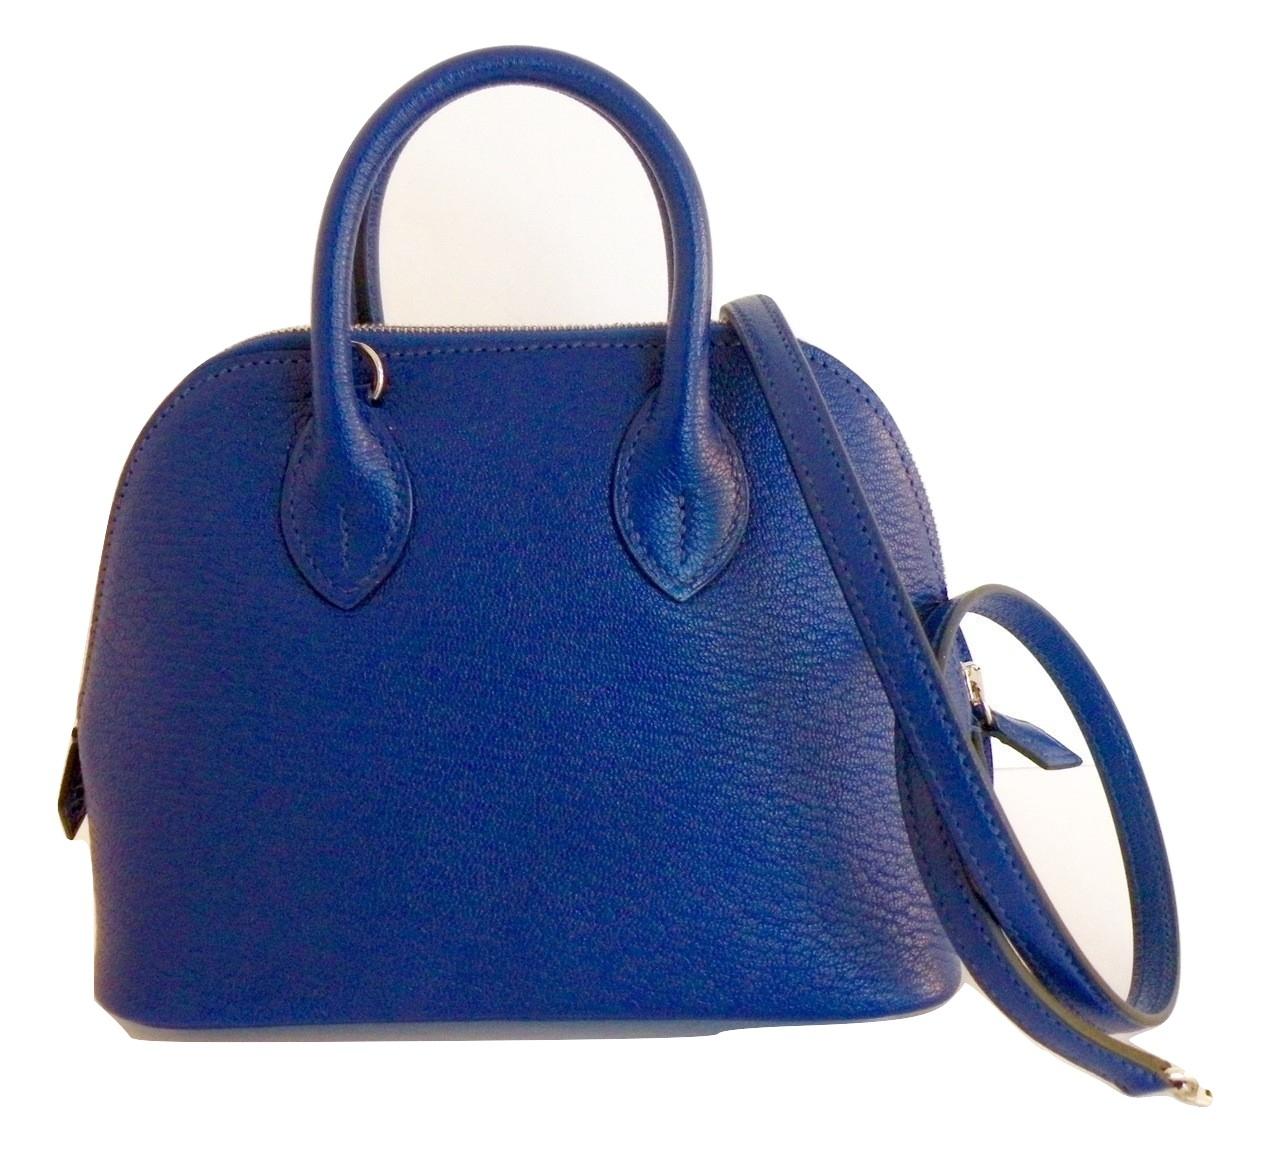 Hermes Mini Bolide Bag
Very Limited Edition
From the Mini Collection of Bags
Collectors go crazy for these because they are so limited
Blue Electric
Chevre Goat Leather
A stamp
Palladium Hardware
Hermes Box, Dustcover, Shoulder strap